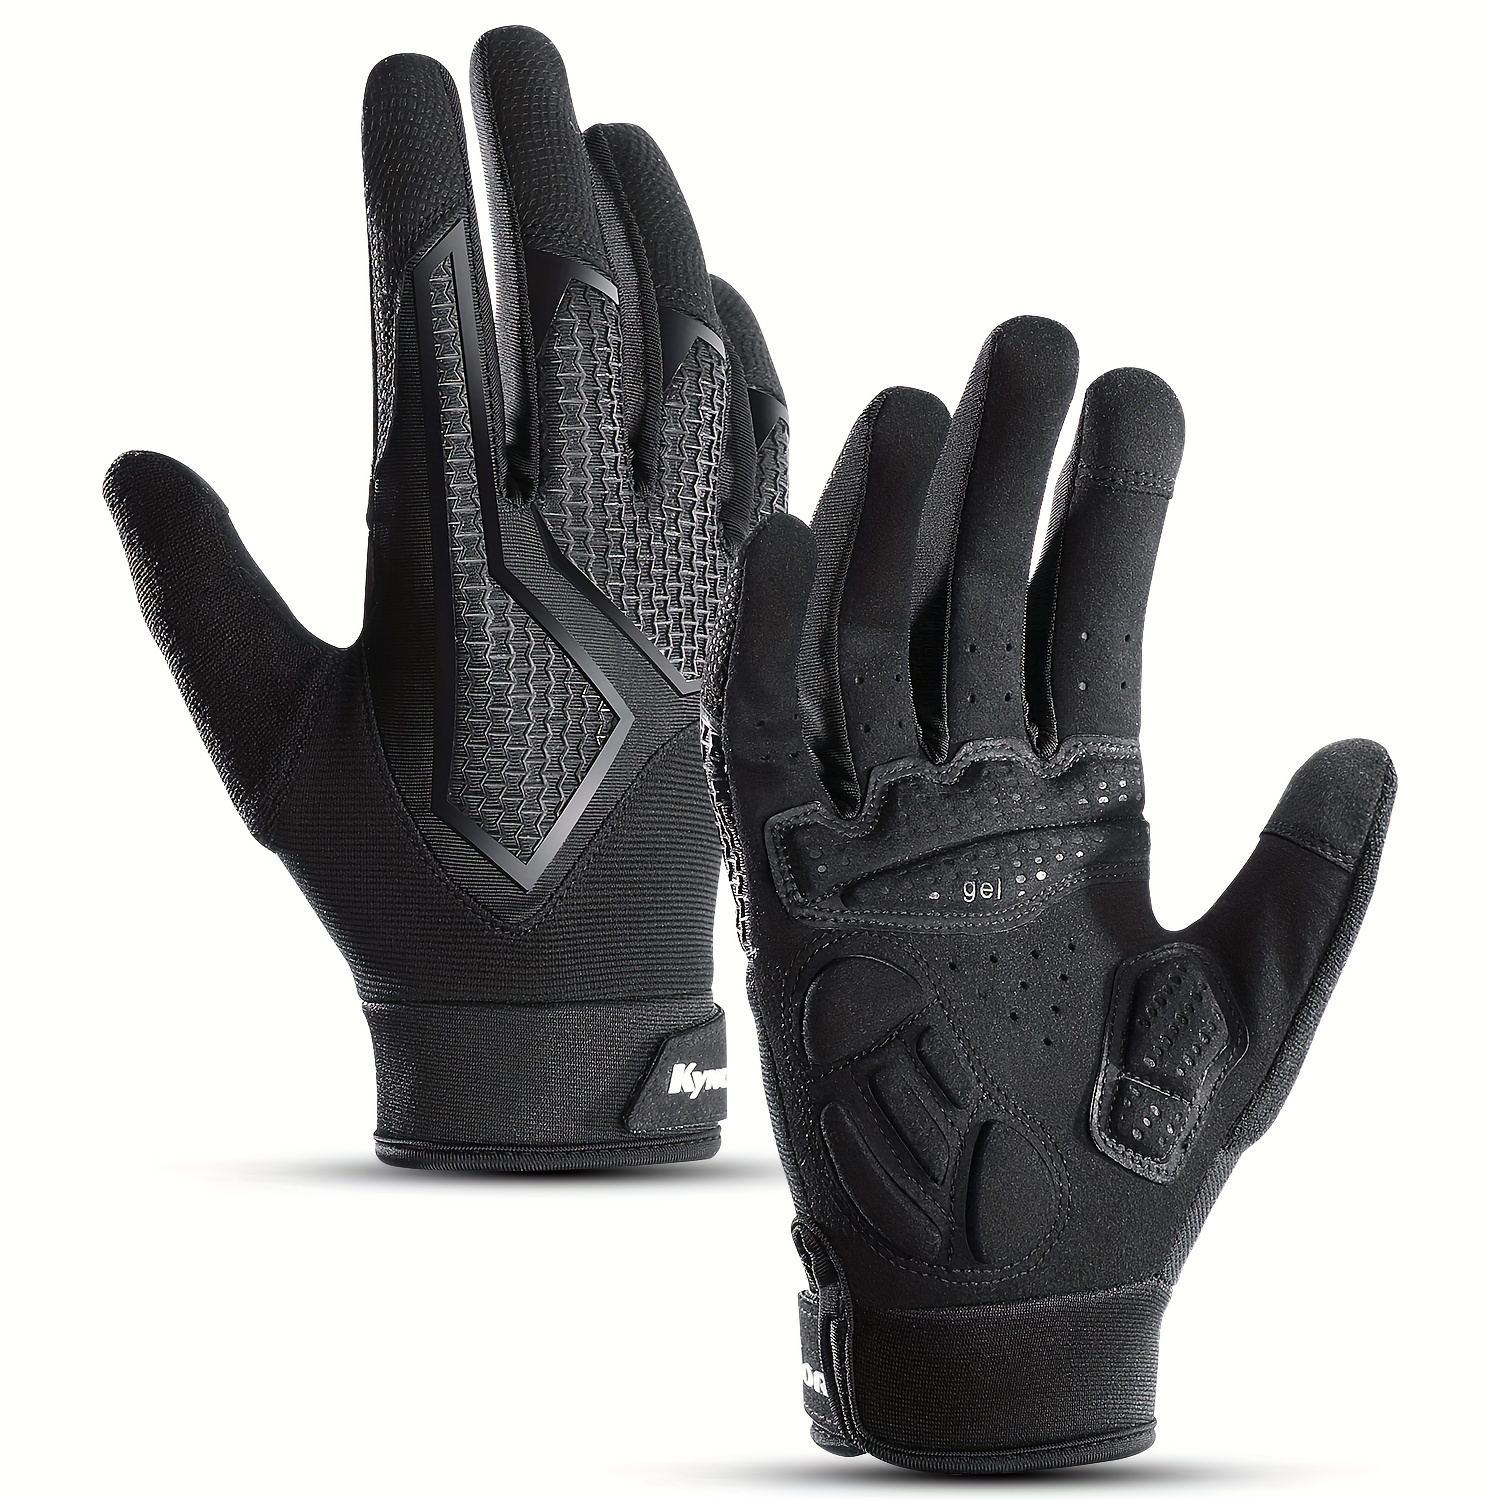 

Sports Outdoor Full Finger Bike Gloves, Anti-slip Motorcycle Gloves, Sun Breathable Touchscreen Cycling Gloves